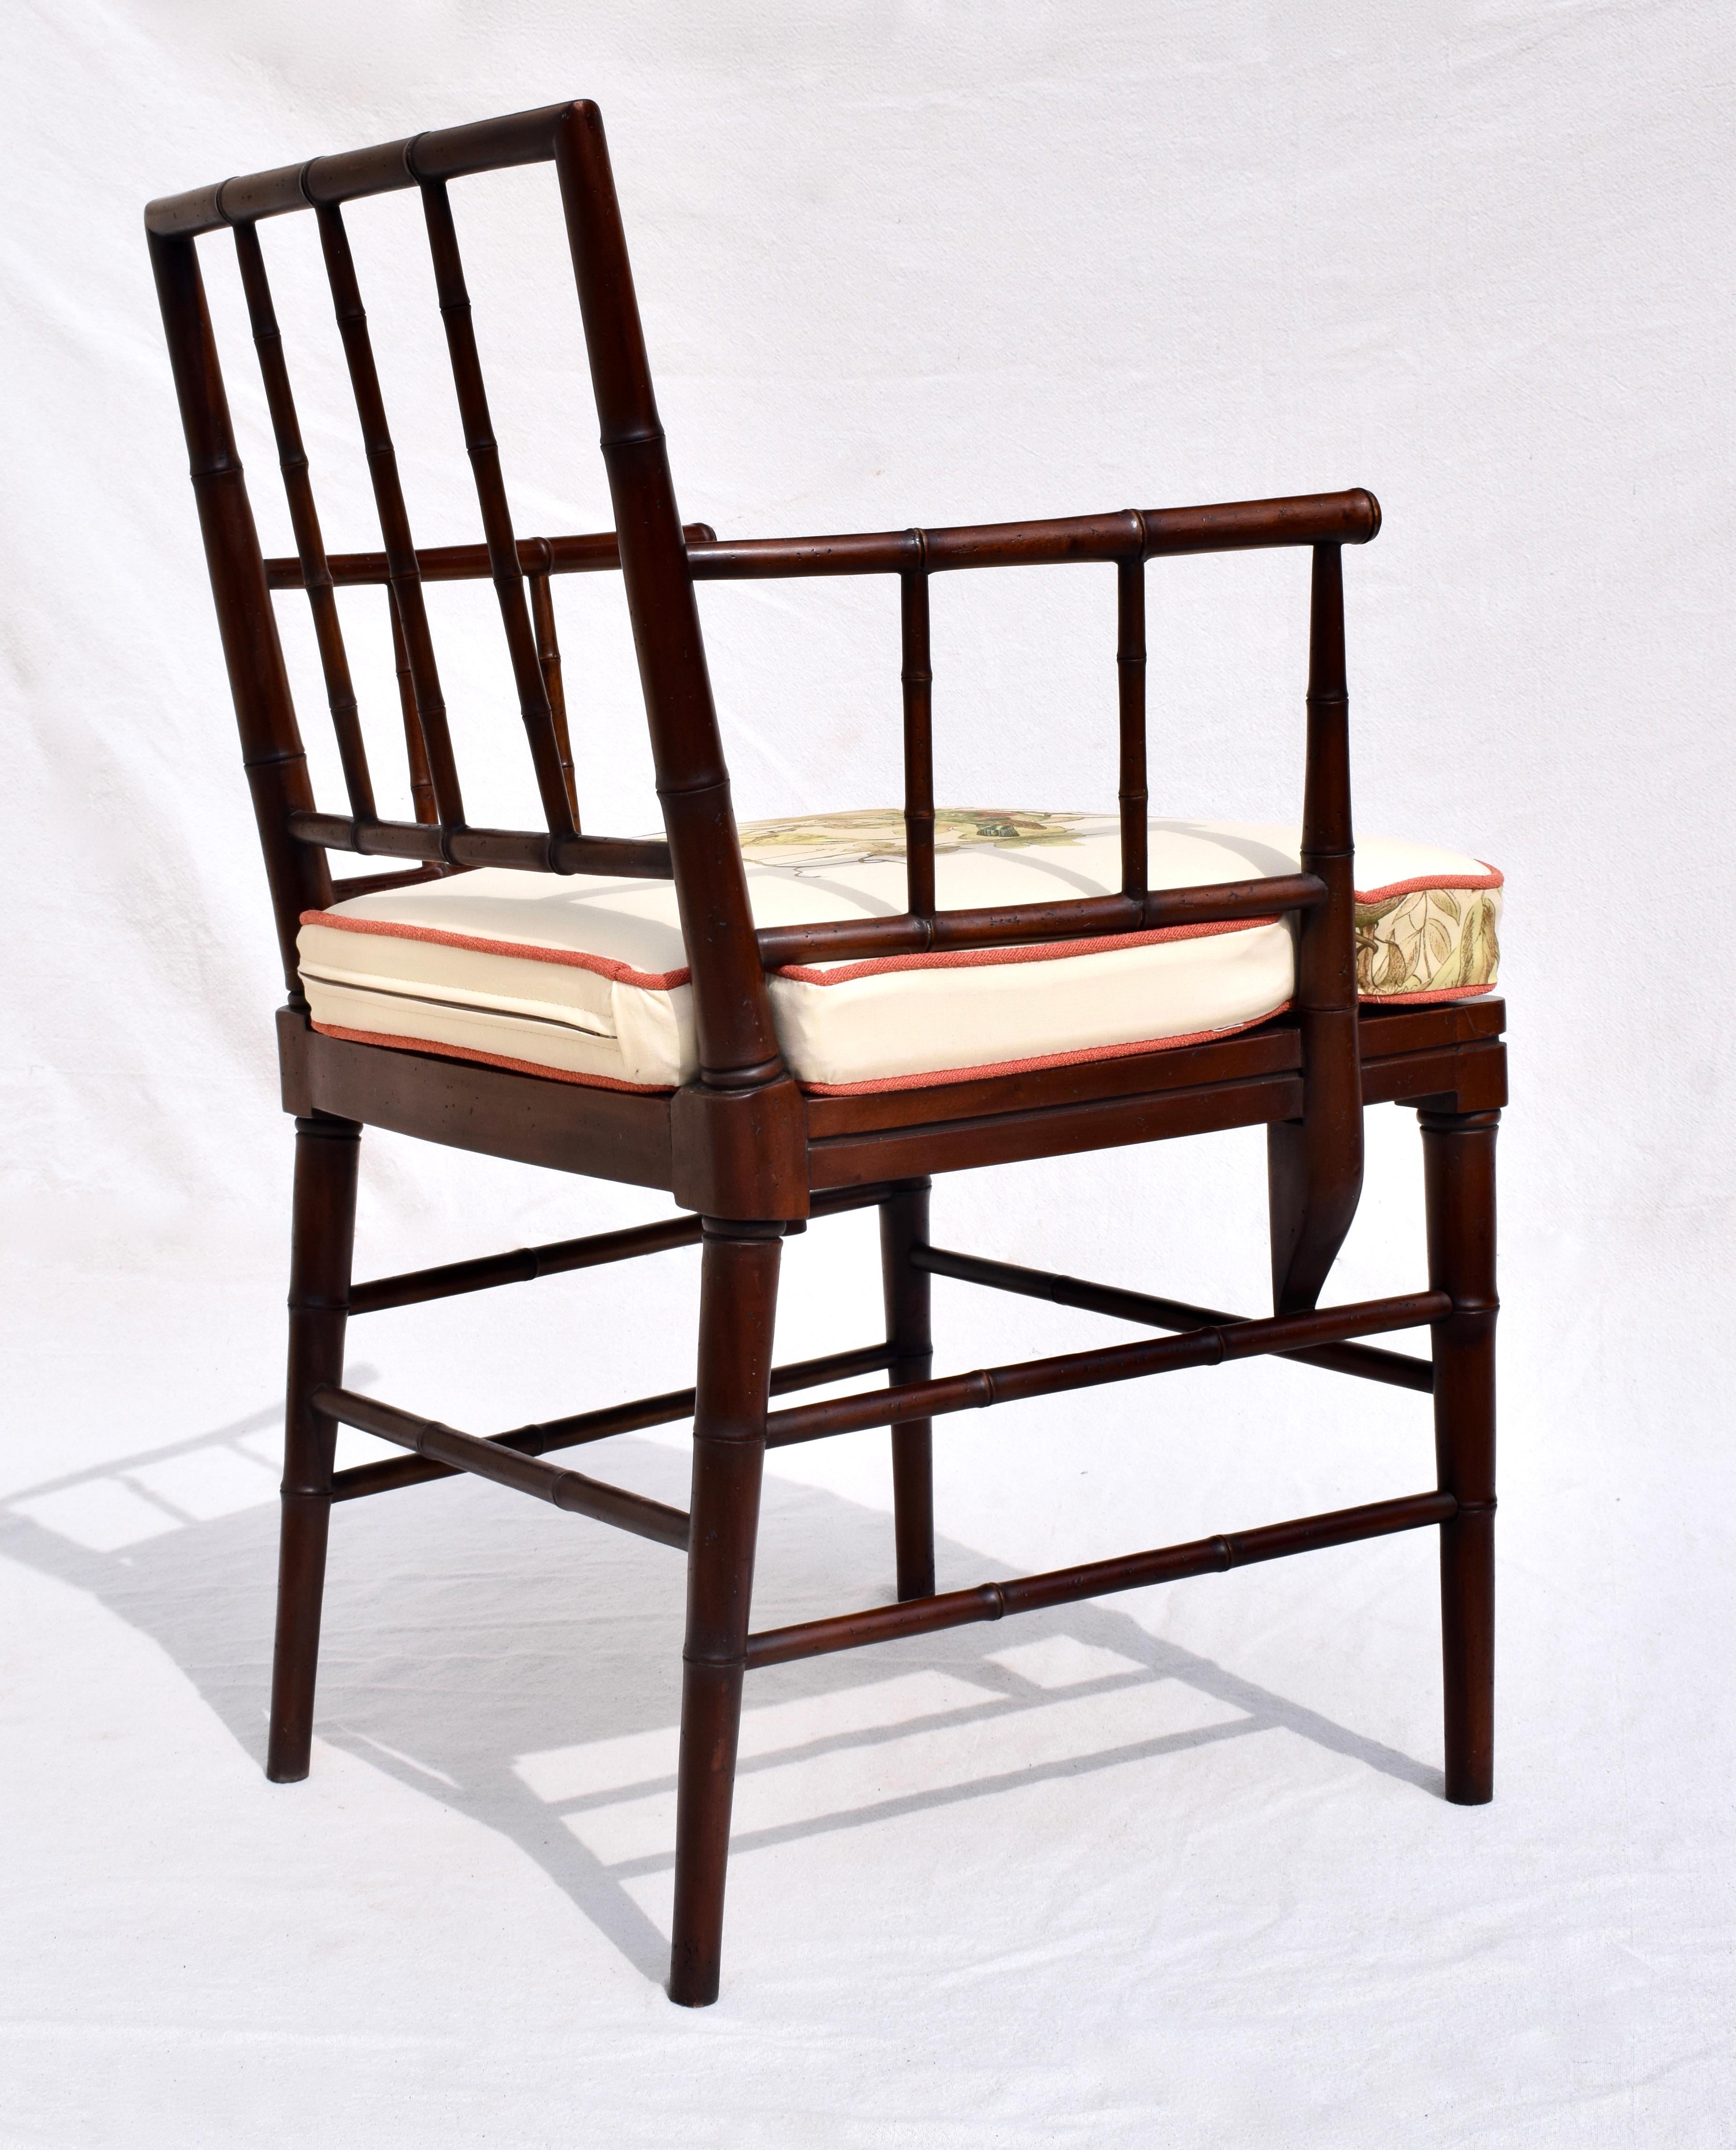 Late 20th Century English Regency French Caned Arm Chair